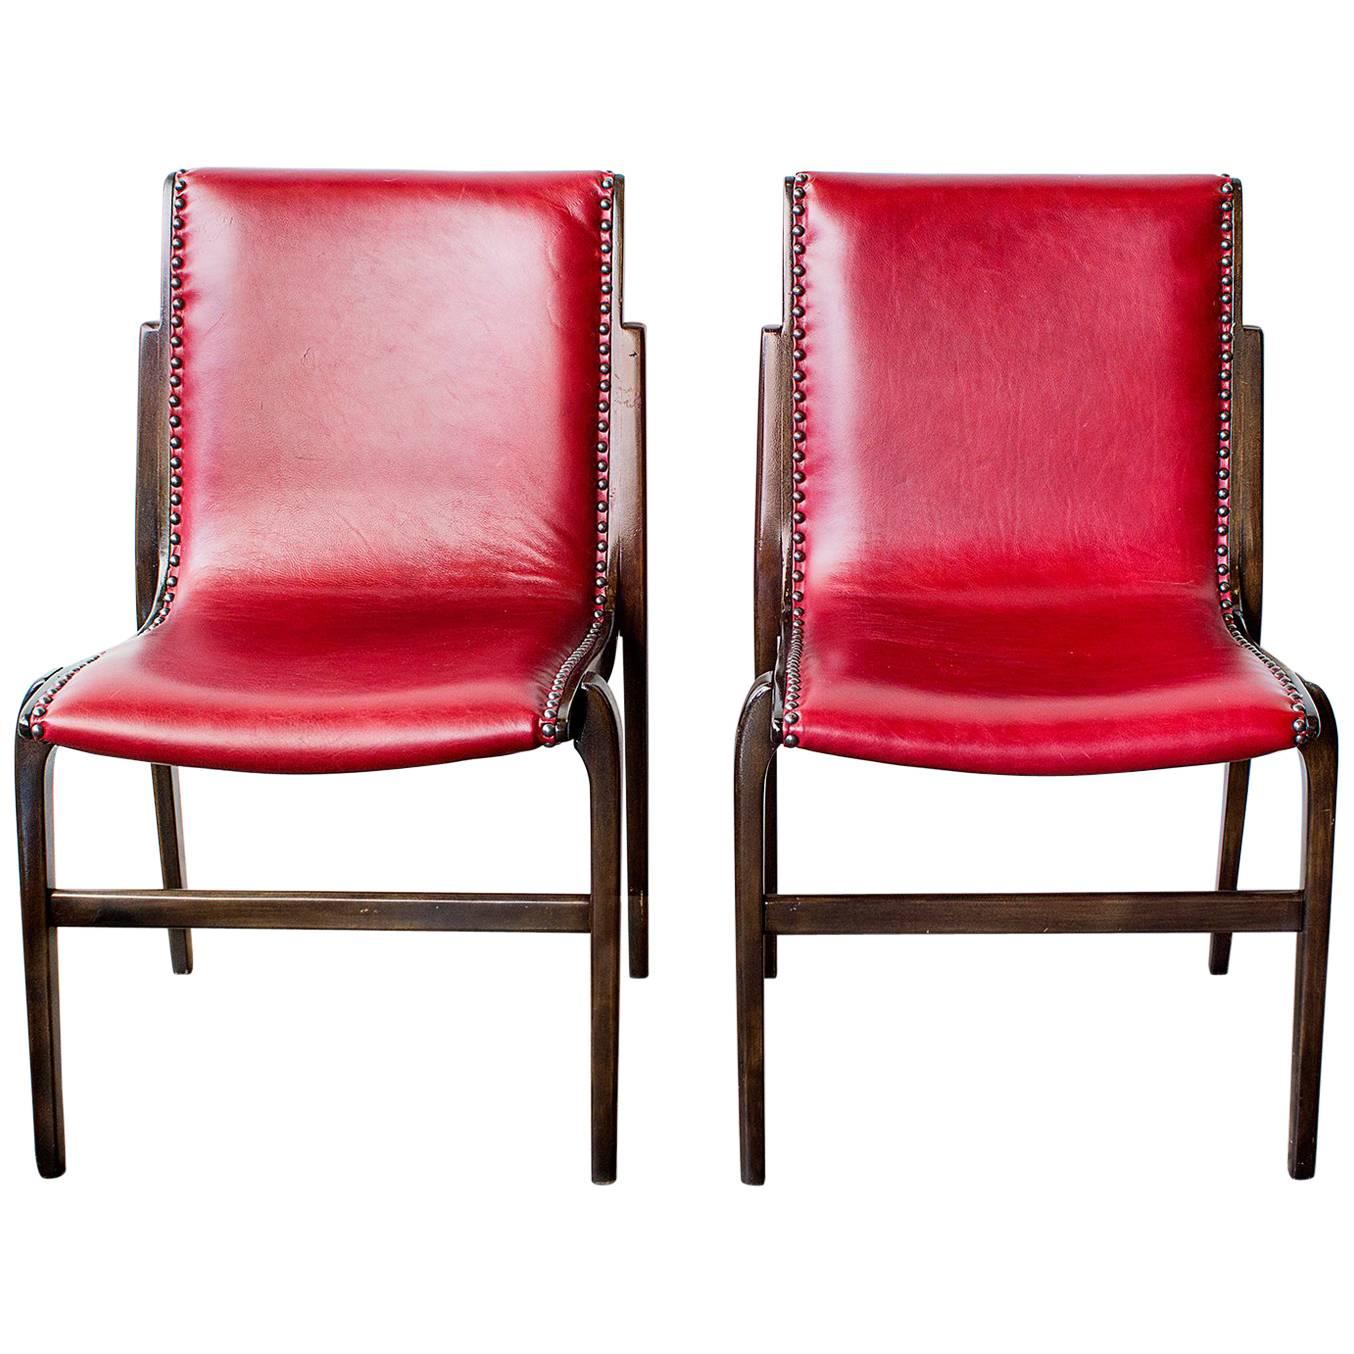 Pair of Bentwood Swedish Side Chairs by Kungsor Stolen